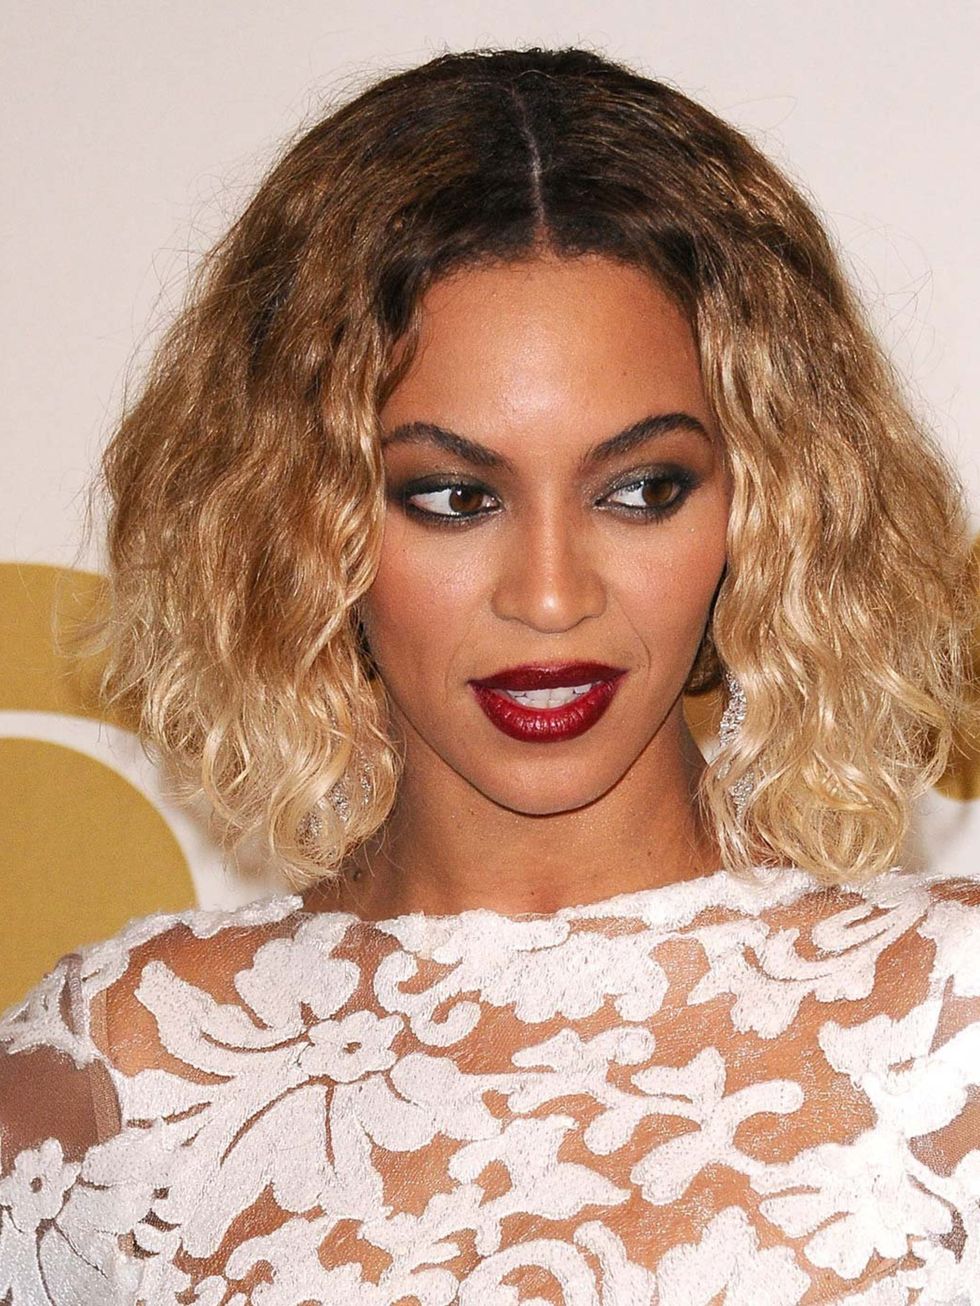 <p><a href="http://www.elleuk.com/star-style/celebrity-style-files/beyonce">Beyonce</a></p>